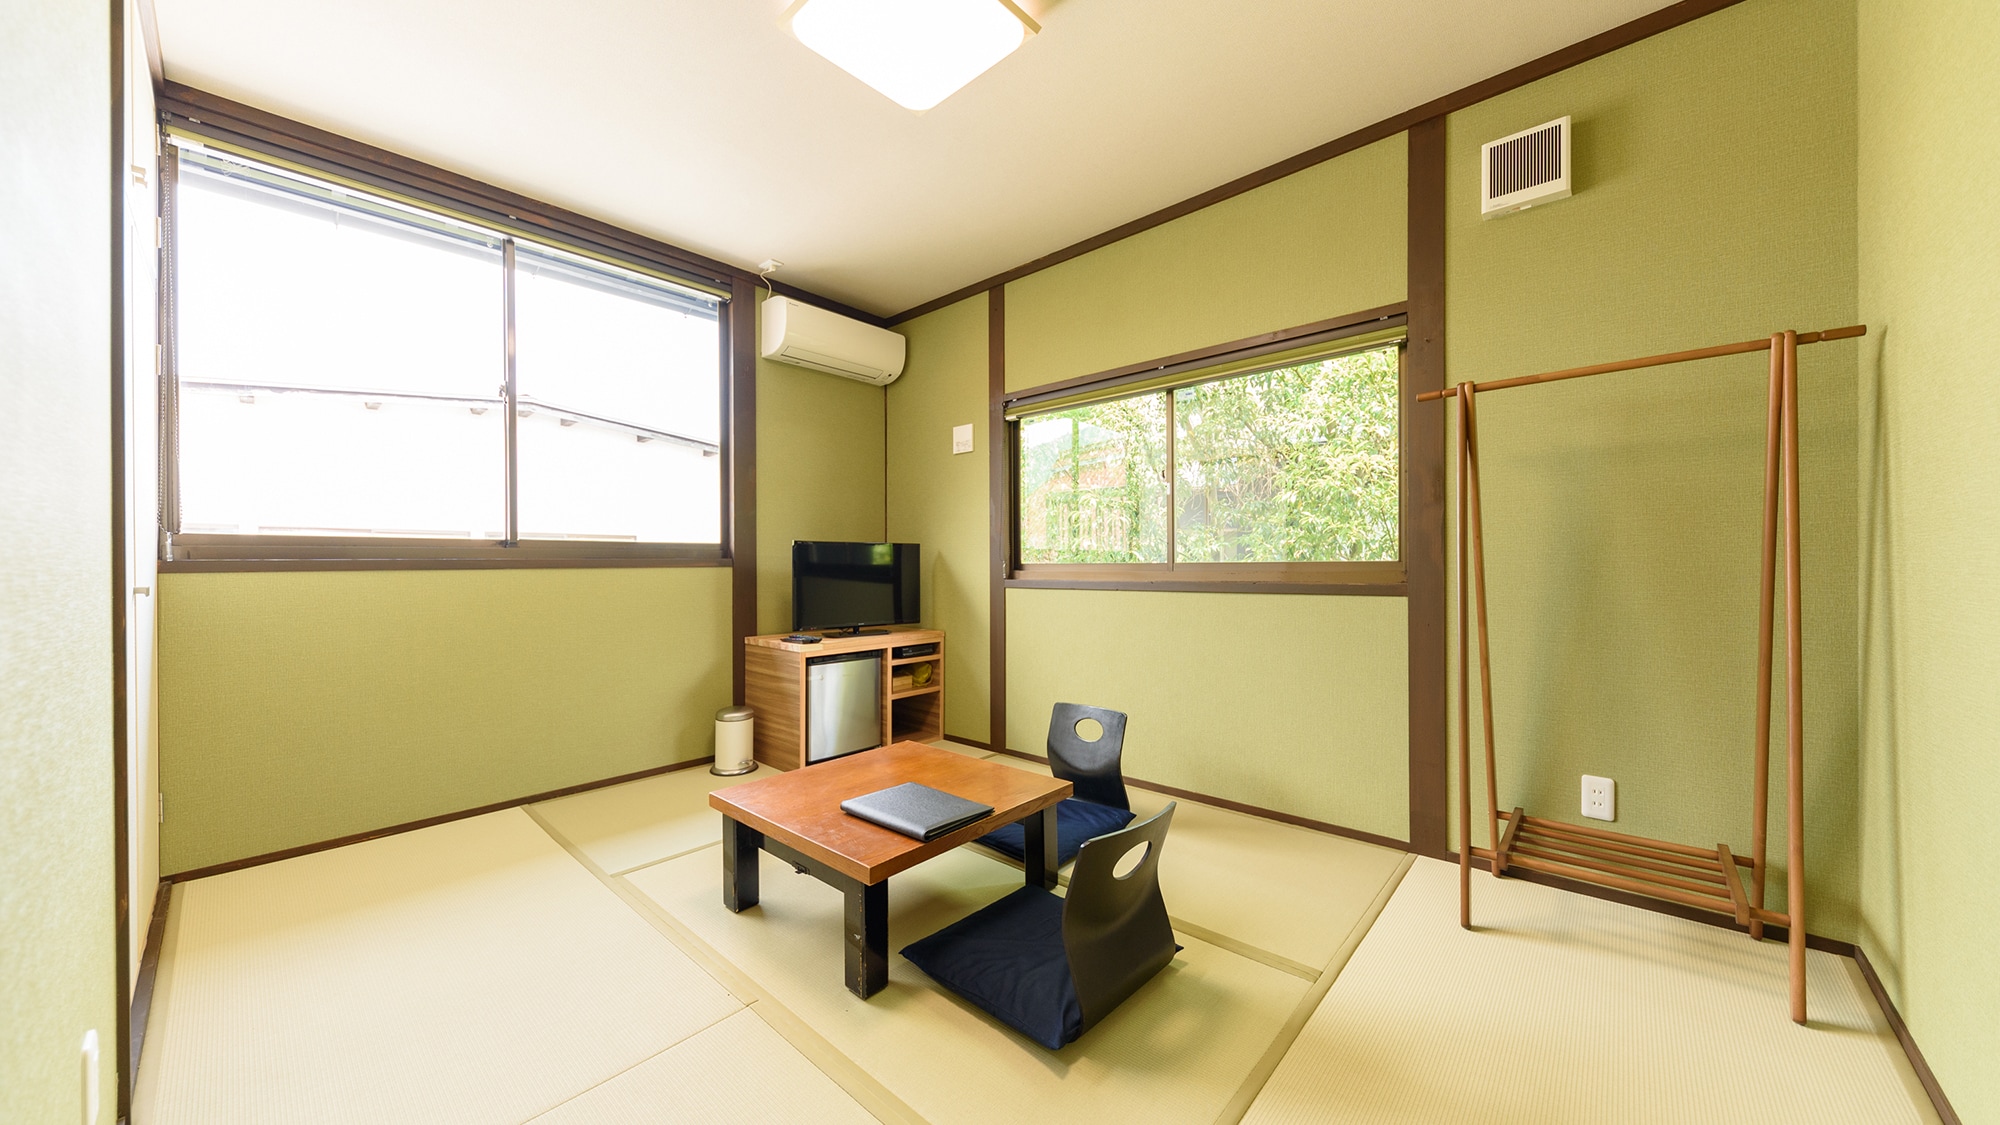 Annex 2nd floor: Japanese-style room 6 tatami mats, shared toilet [Moe Huang]